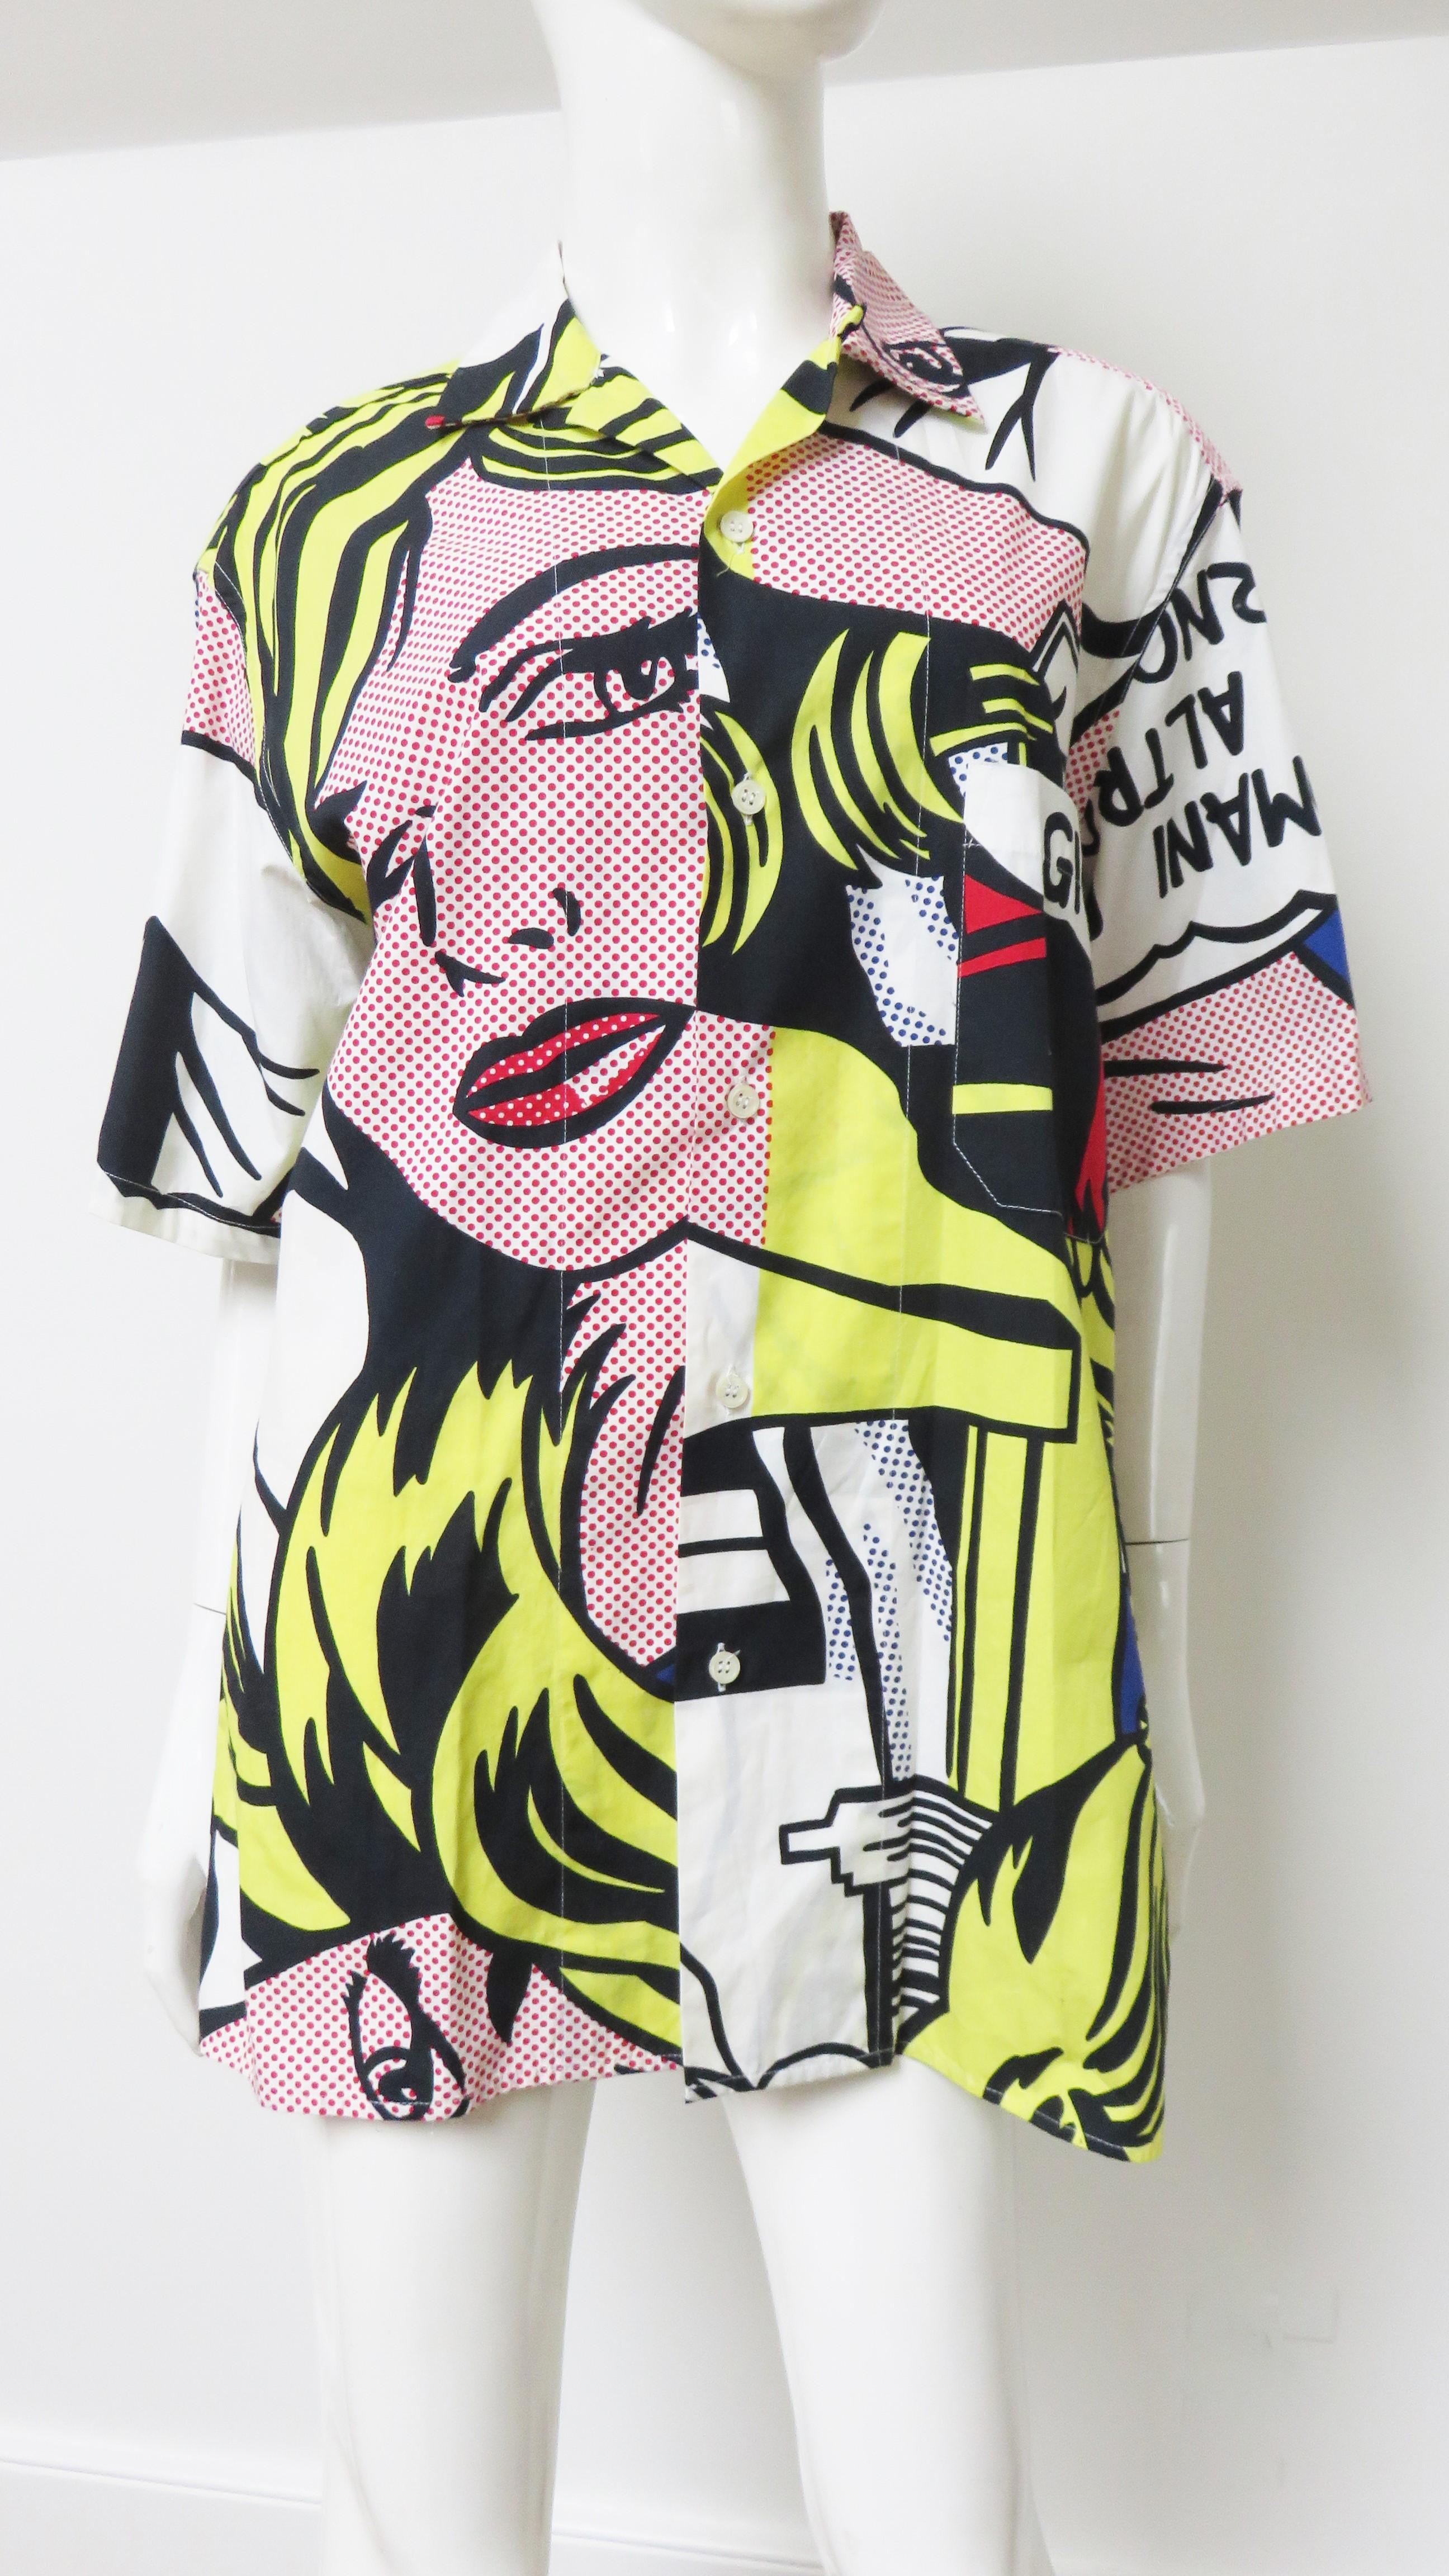 A fabulous white cotton shirt with a Lichtenstein comic book print in bright primary colors from Moschino Cheap and Chic Uomo.  It has a shirt collar, short sleeves, a breast pocket and is resplendent with a woman's face and Italian words and